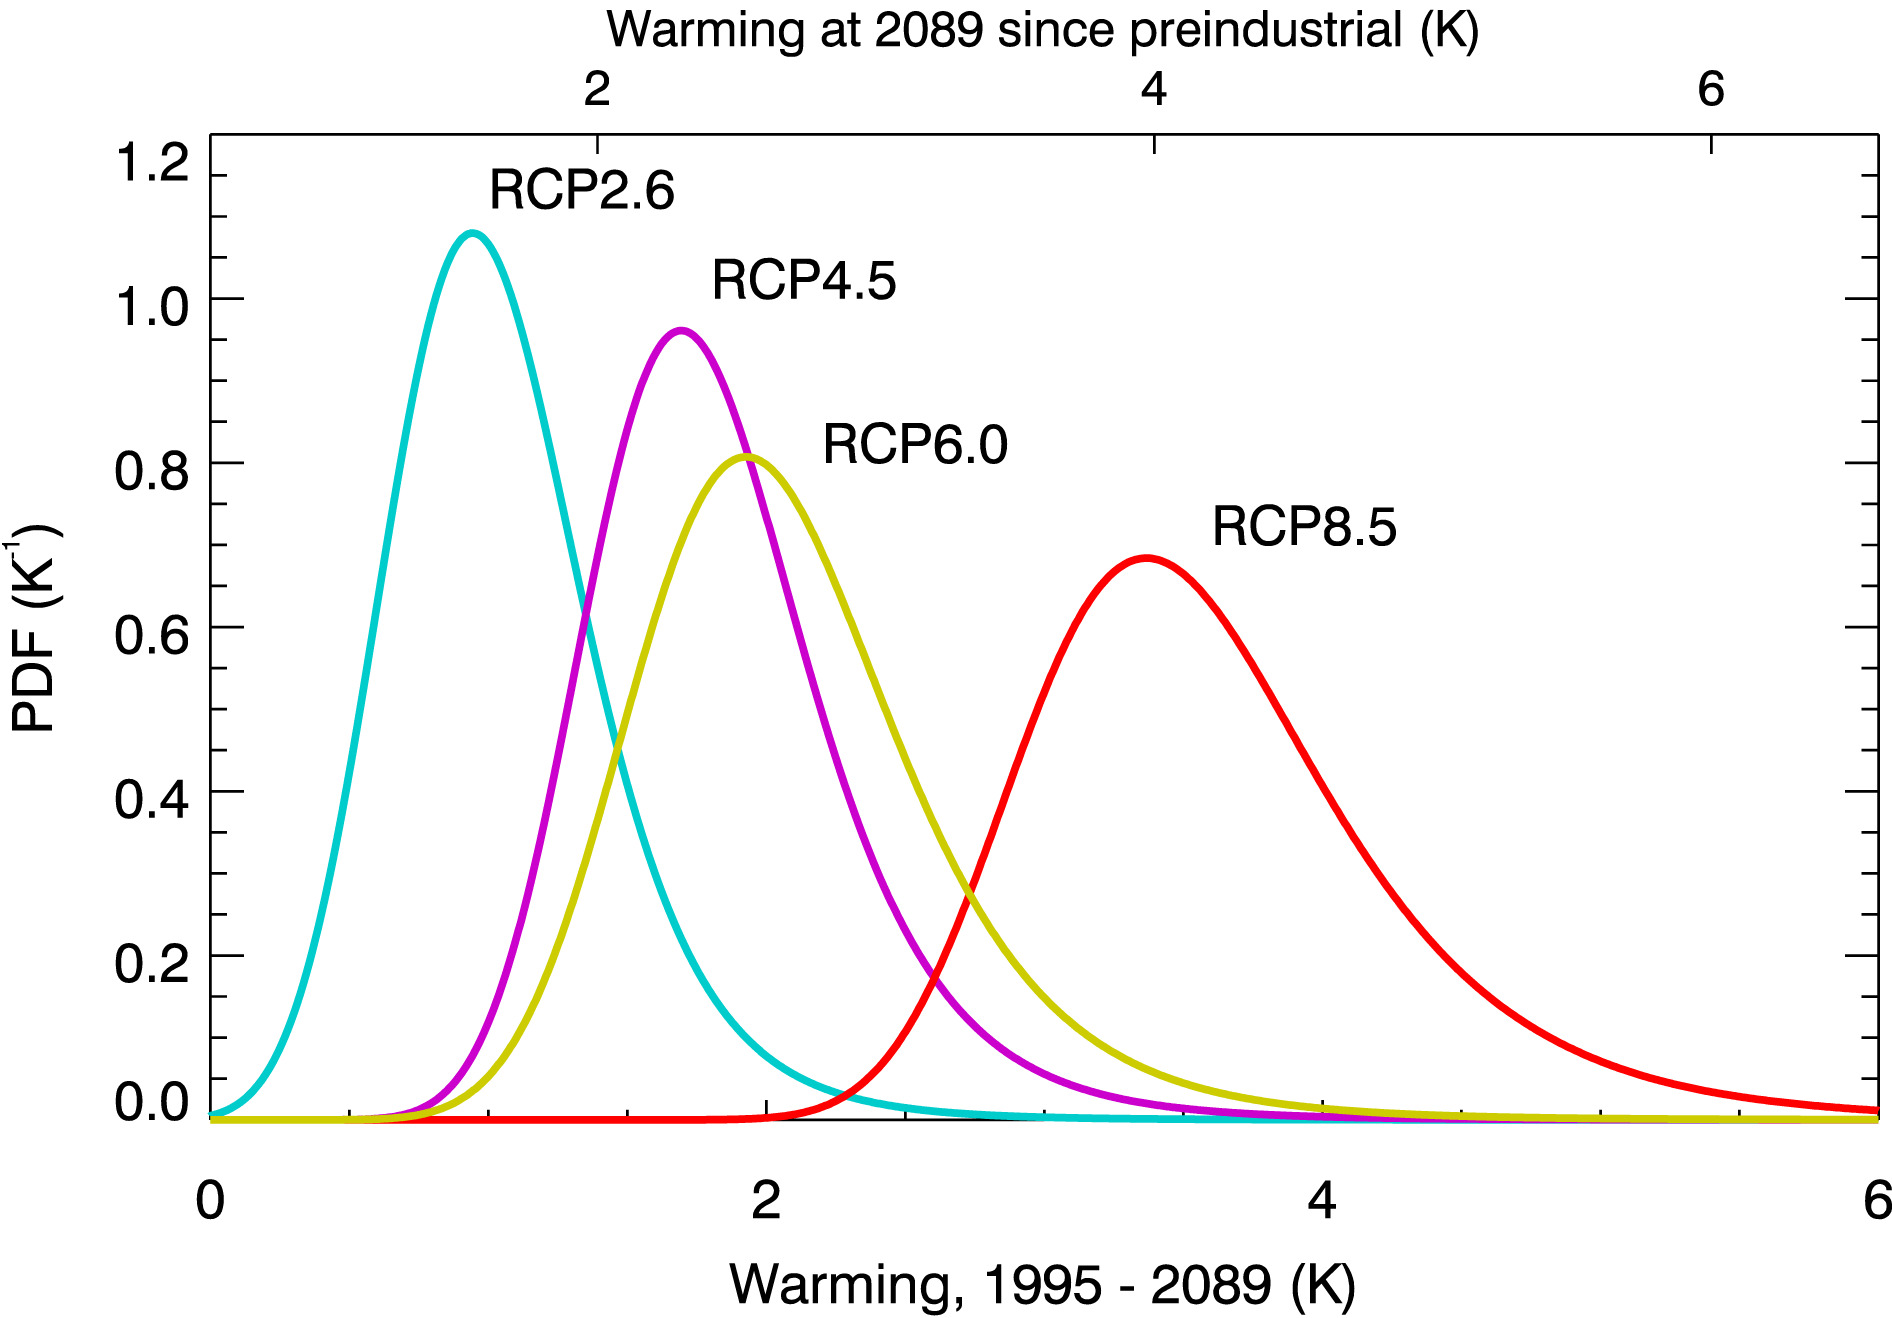 Warming projections